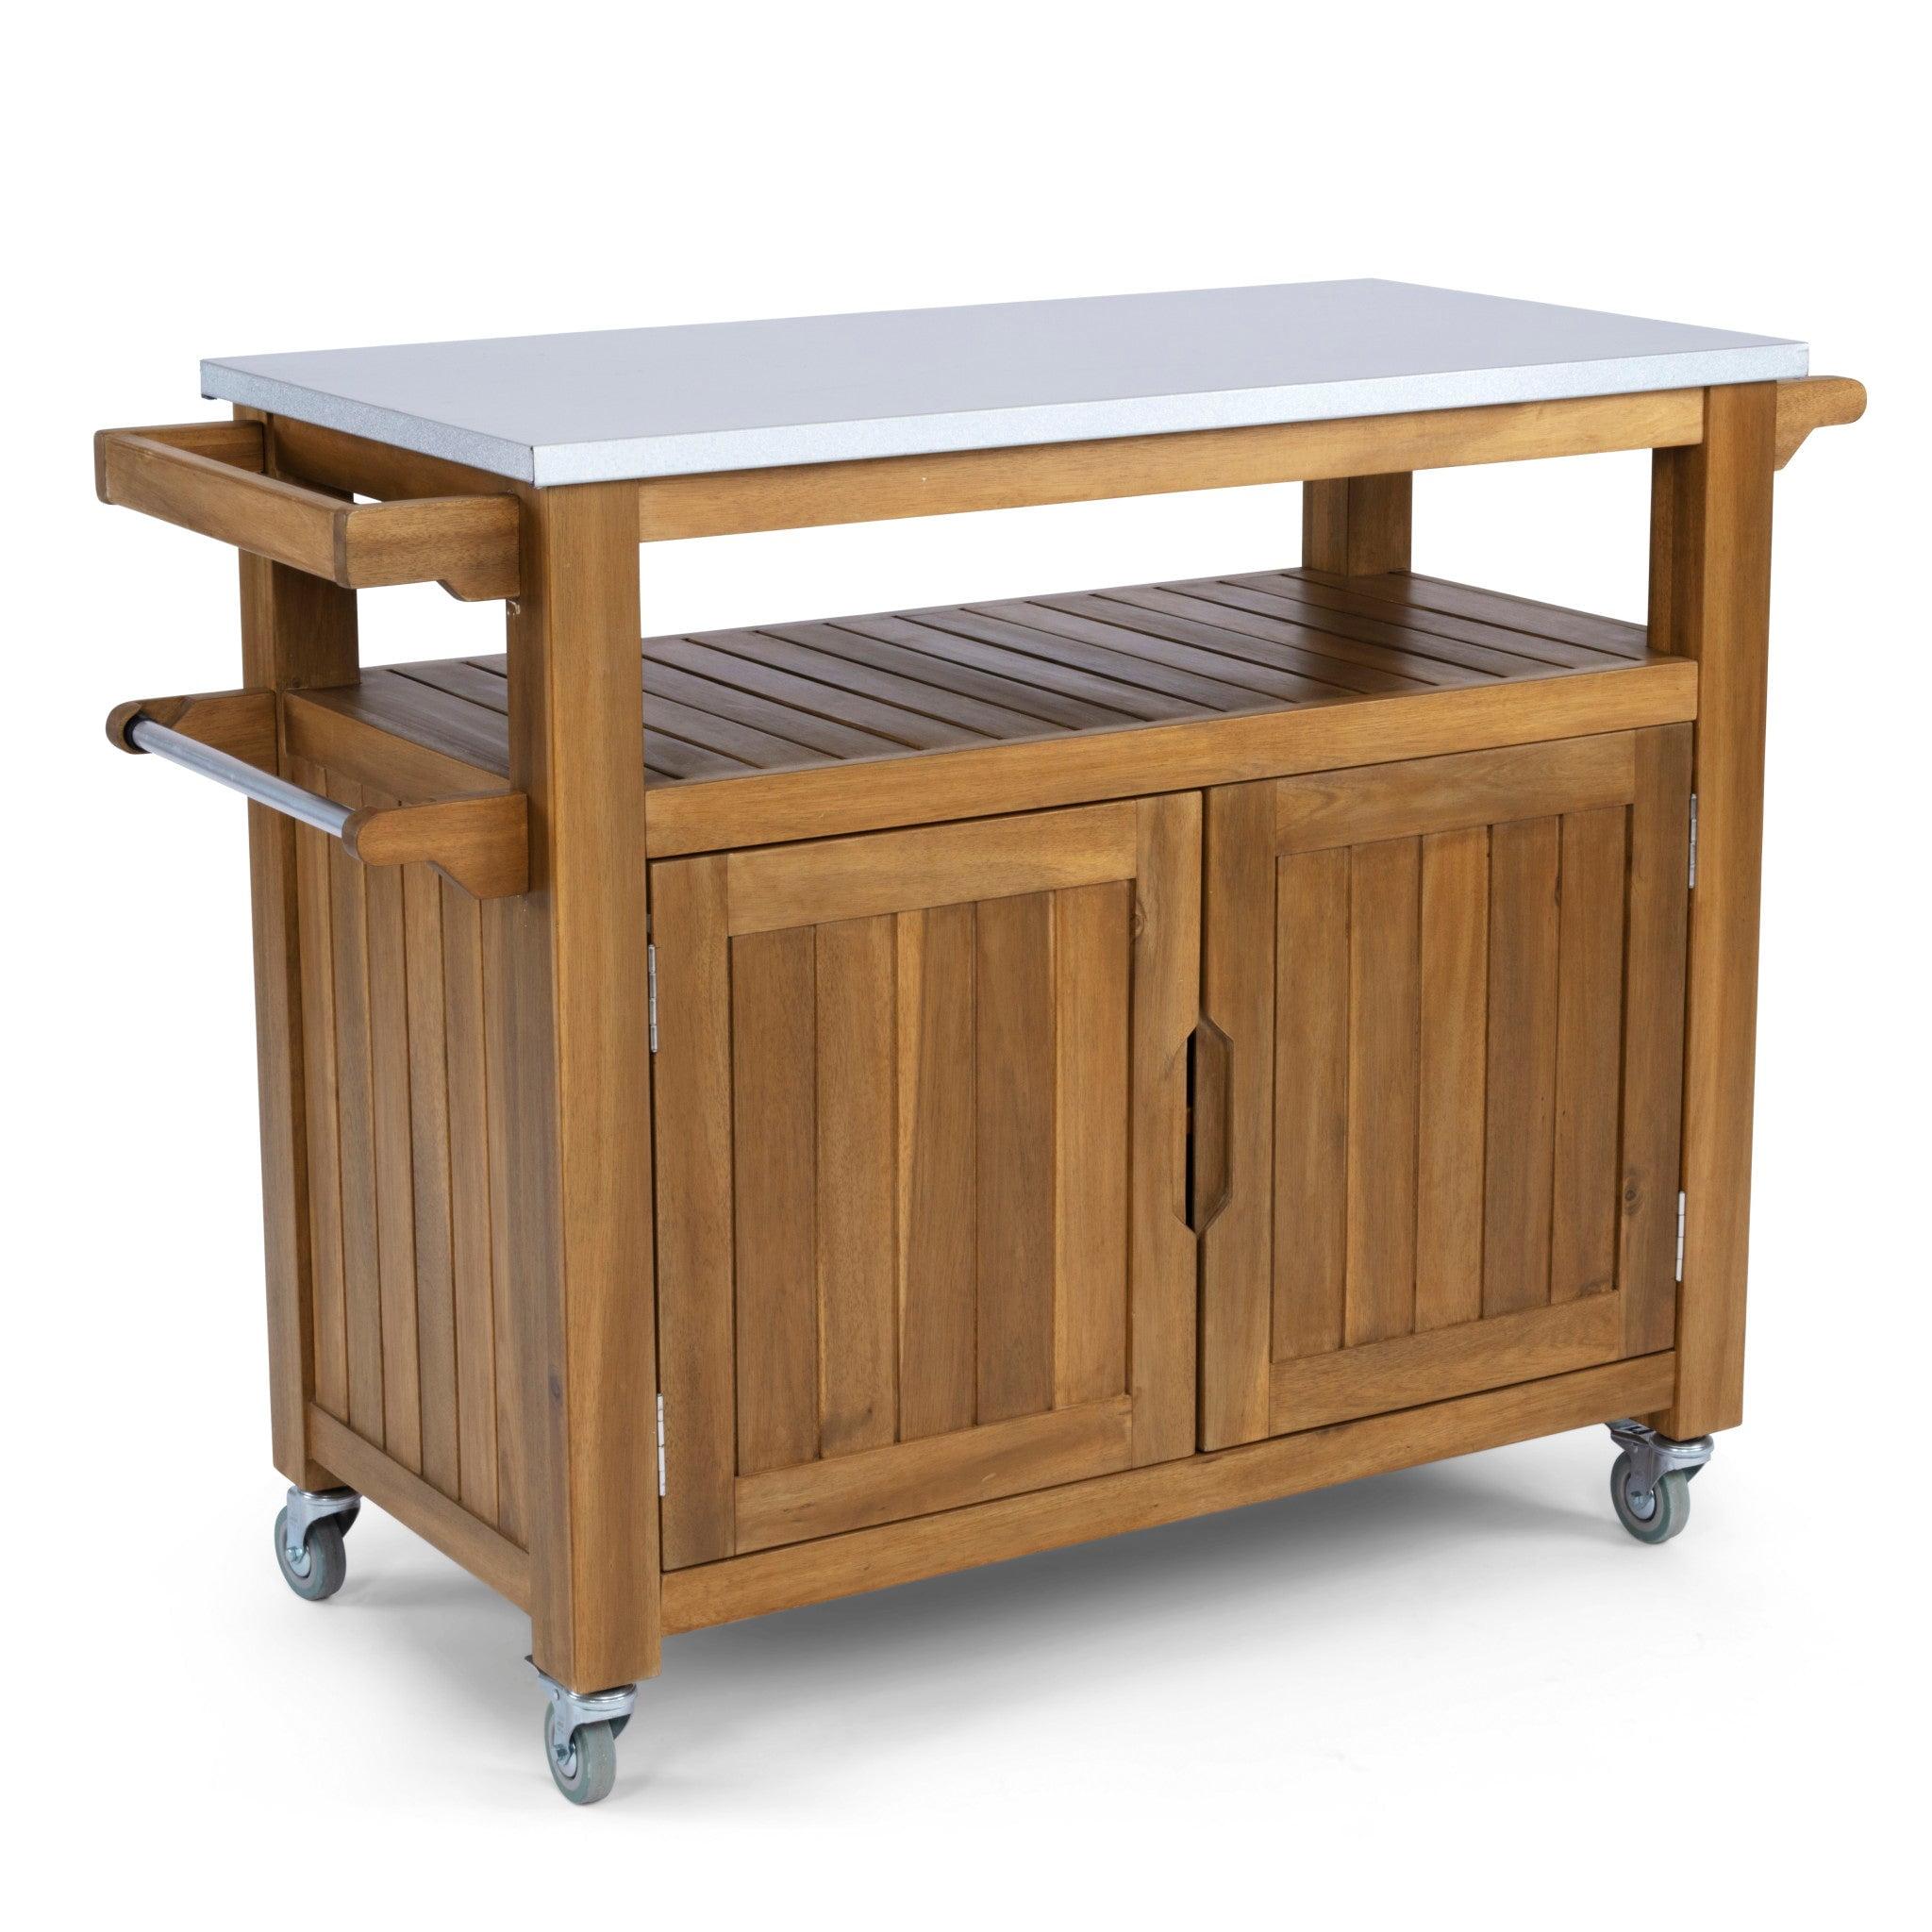 Golden Teak Acacia Wood Kitchen Cart with Spice Rack and Storage